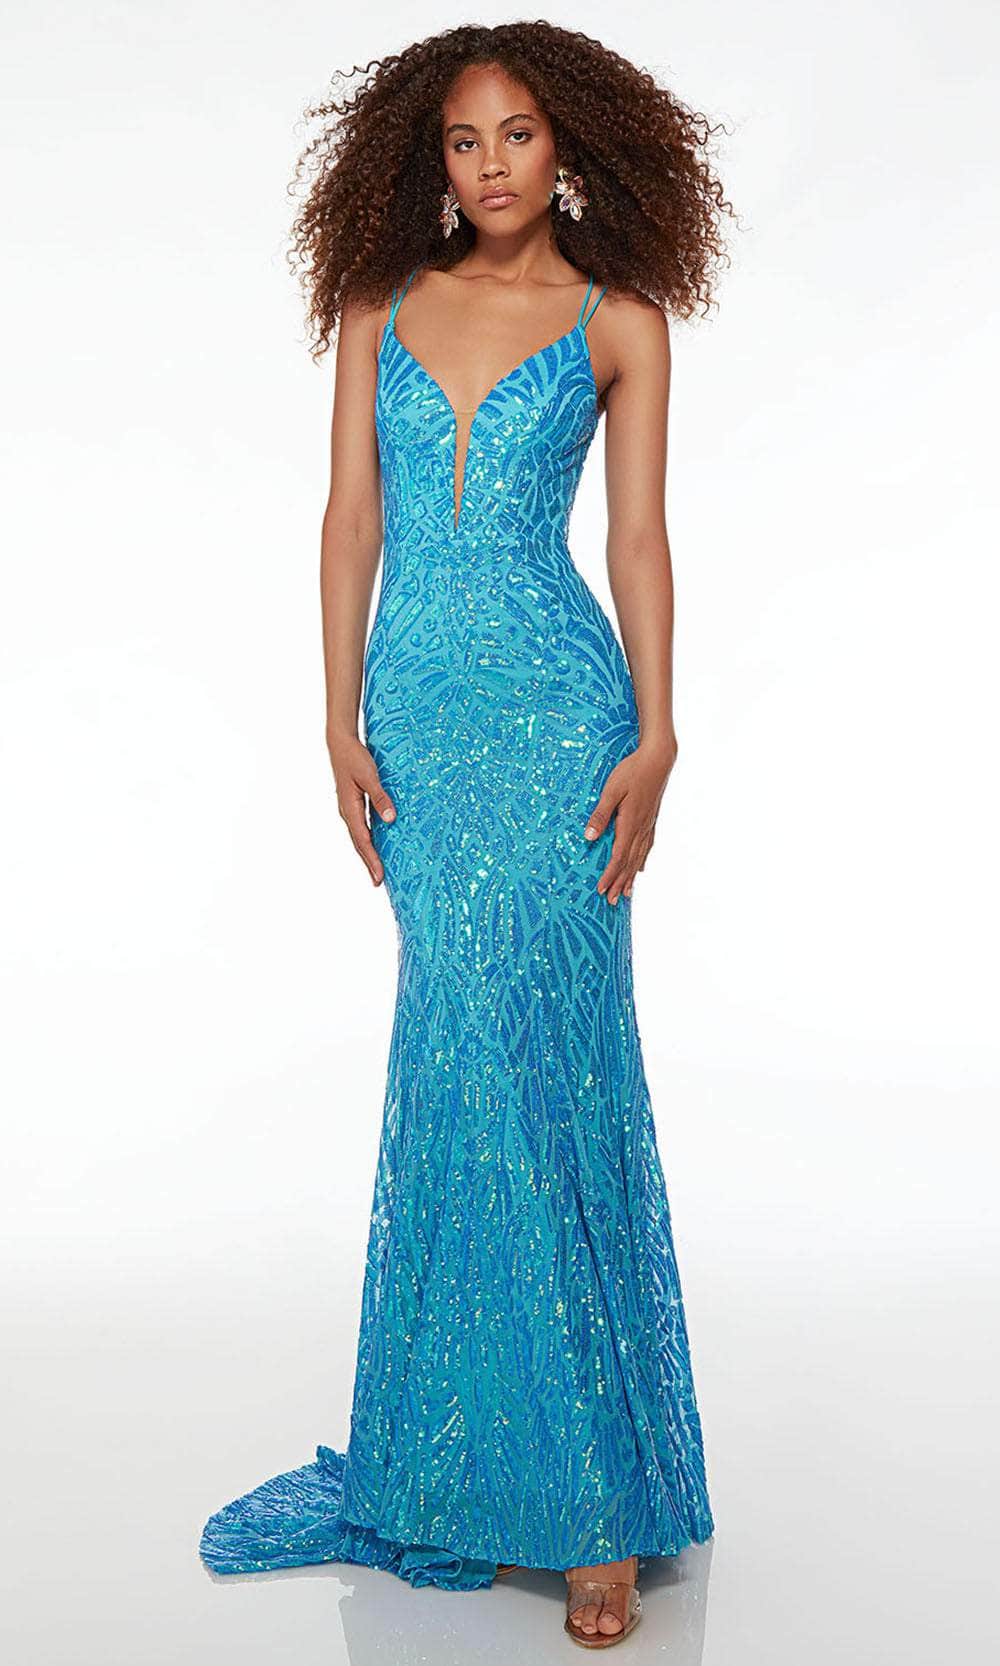 Alyce Paris 61618 - Sequin Beaded Sleeveless Dress Special Occasion Dresses